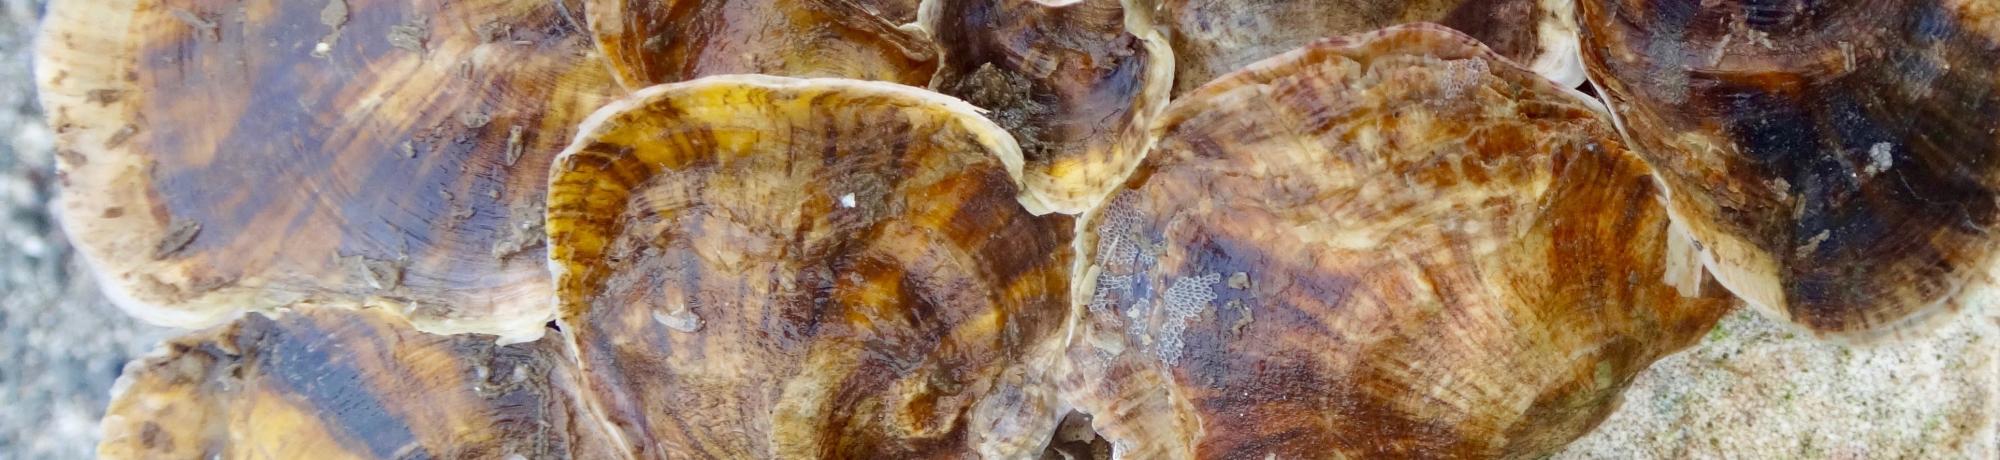 Close up of oysters